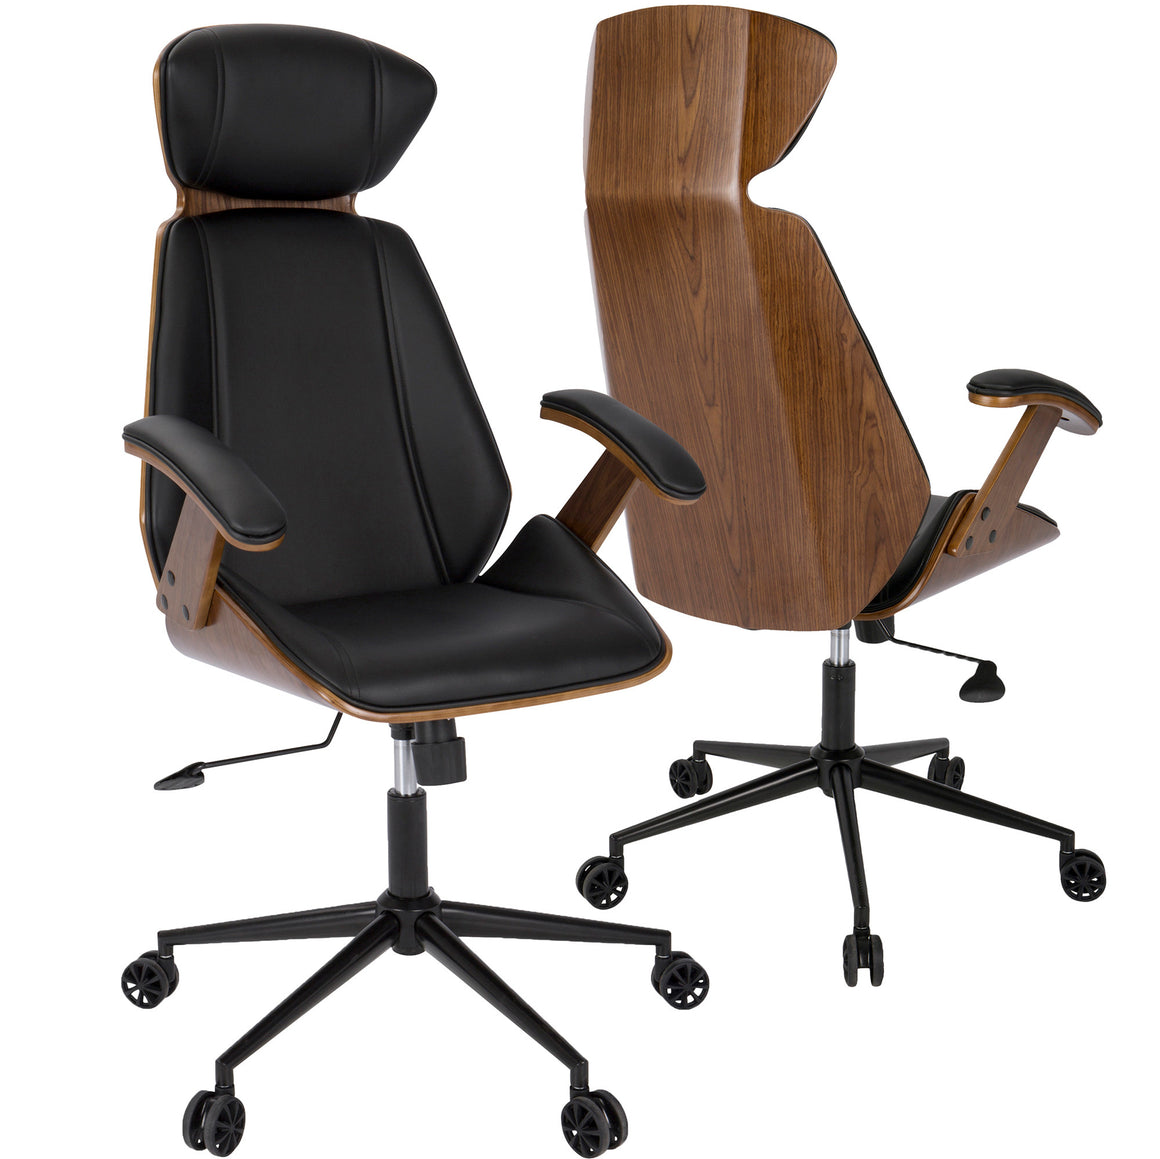 Spectre Mid-Century Modern Adjustable Office Chair in Walnut Wood and Black Faux Leather by LumiSource